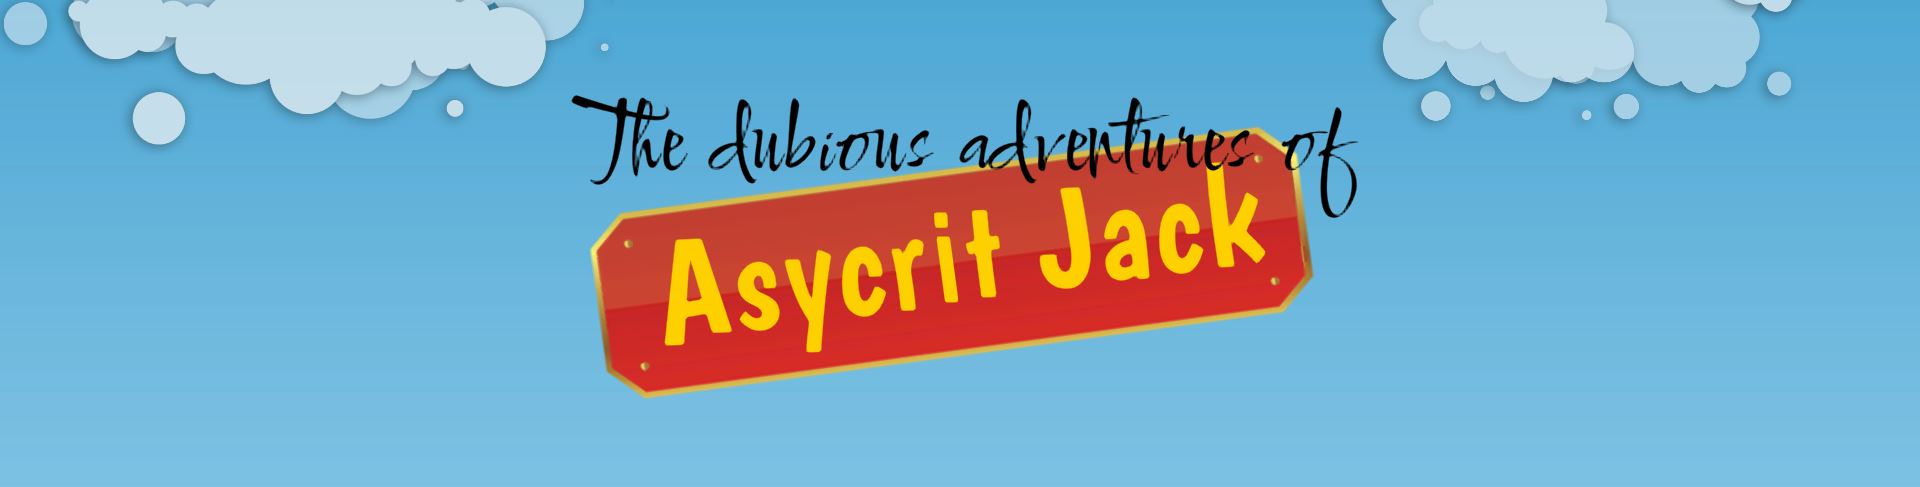 The dubious adventures of Asycrit Jack